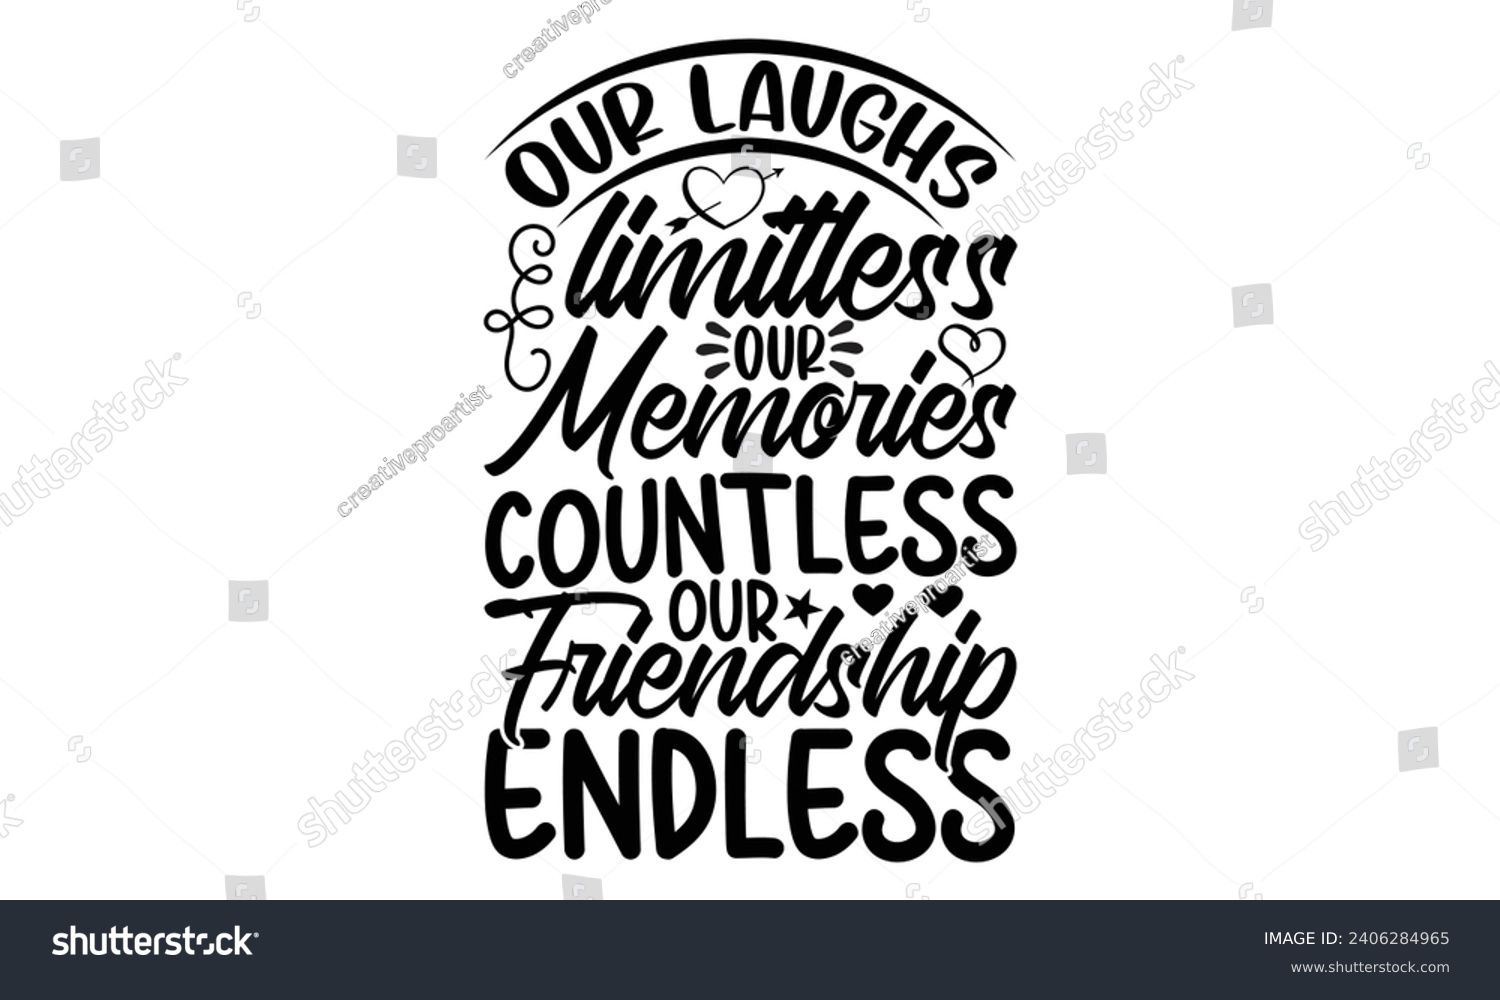 SVG of Our Laughs Limitless Our Memories Countless Our Friendship Endless- Best friends t- shirt design, Hand drawn lettering phrase, Illustration for prints on bags, posters, cards eps, Files for Cutting, I svg